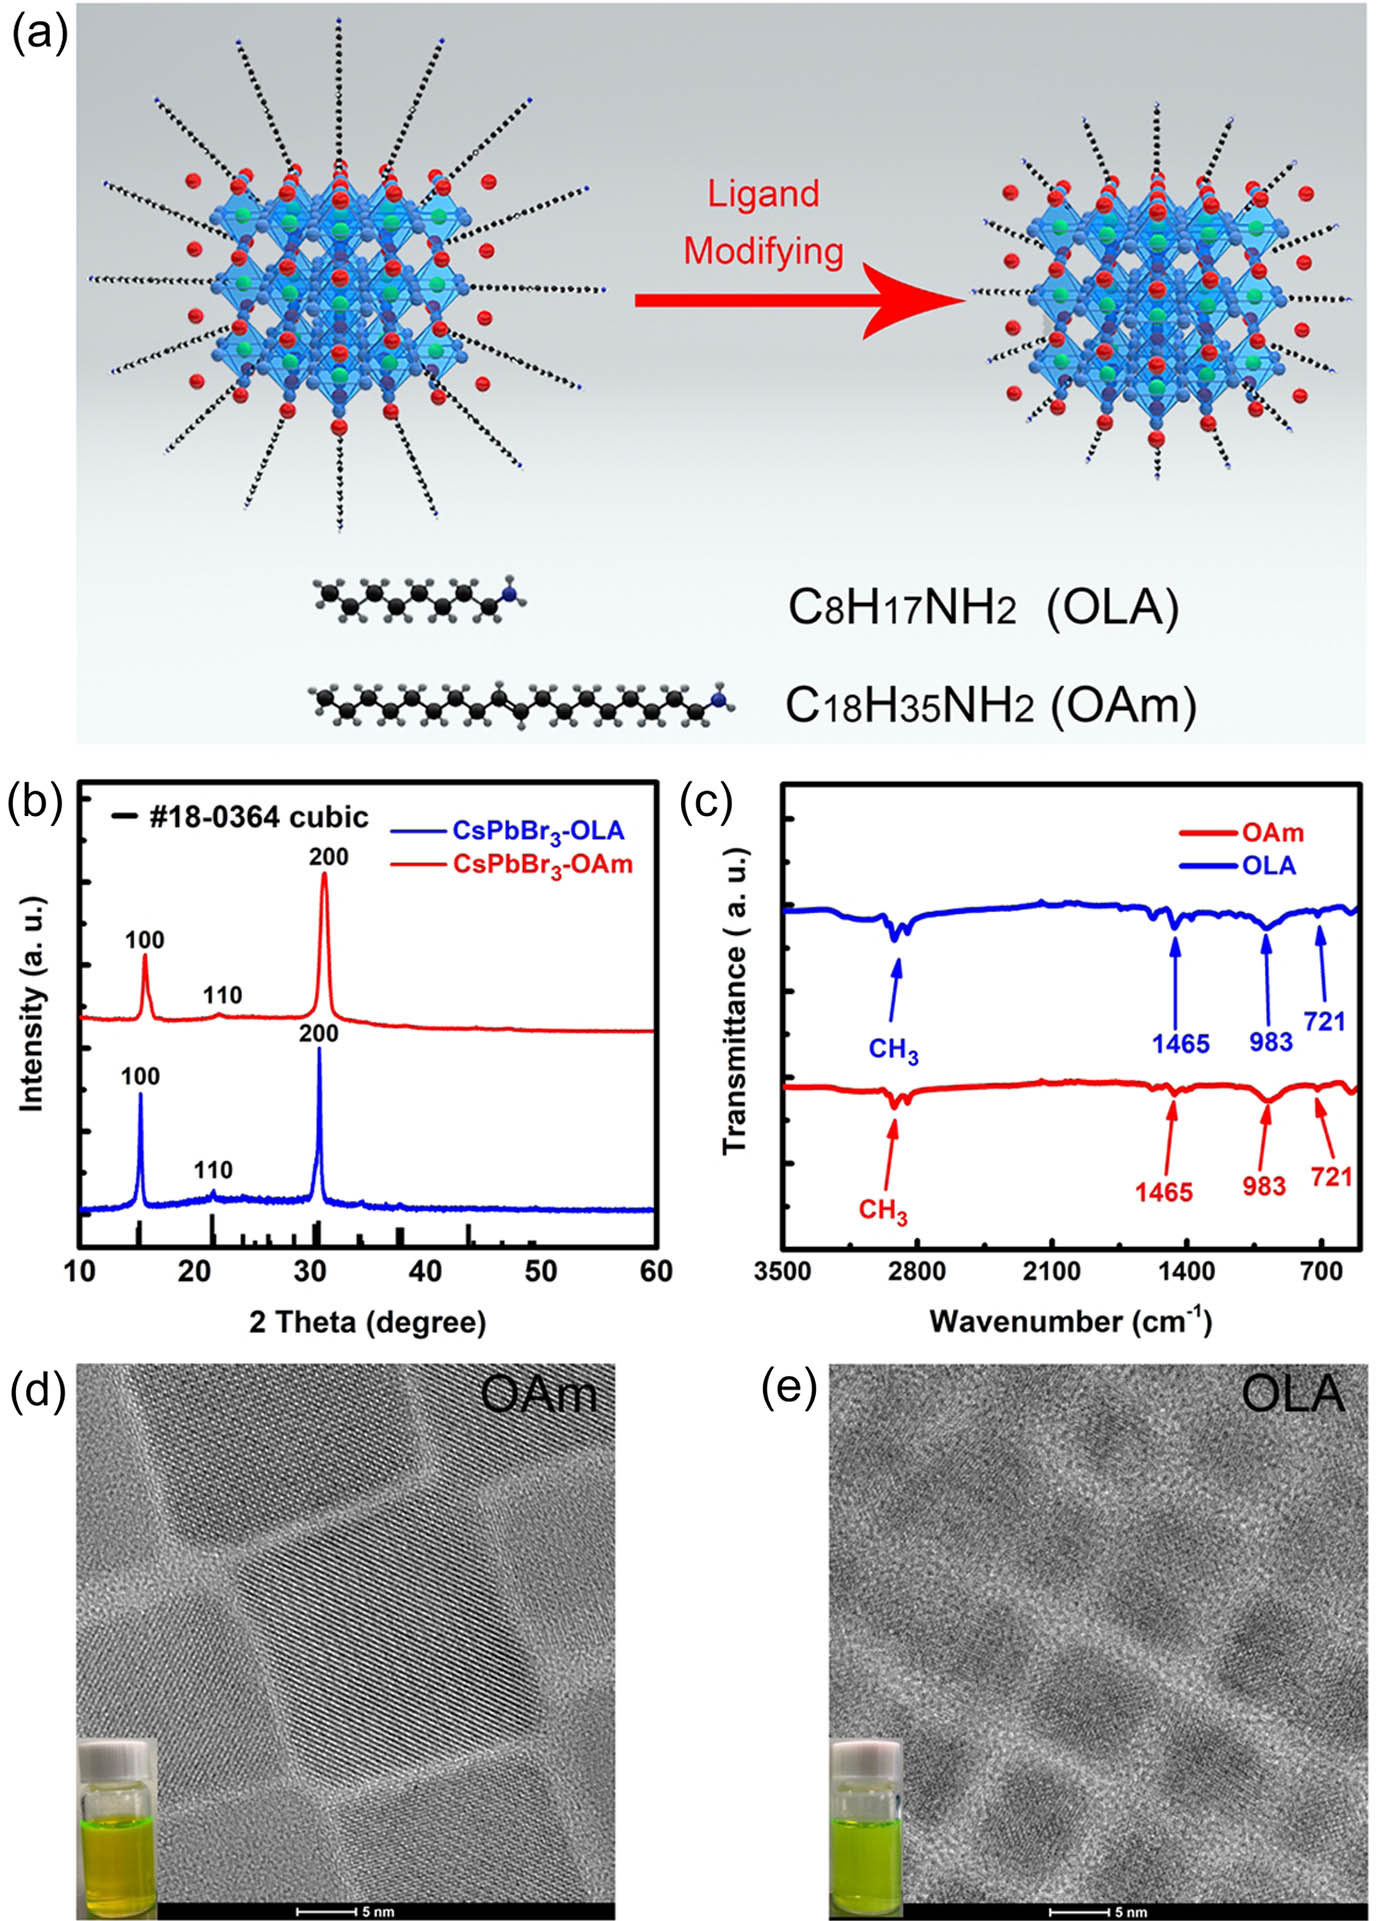 (a) Passivation and ligand modification procedure on the surface of the CsPbBr3 QDs. (b) XRD patterns and (c) FTIR spectra for CsPbBr3 QDs with different ligands. HRTEM images for (d) CsPbBr3-OAm and (e) CsPbBr3-OLA QDs.